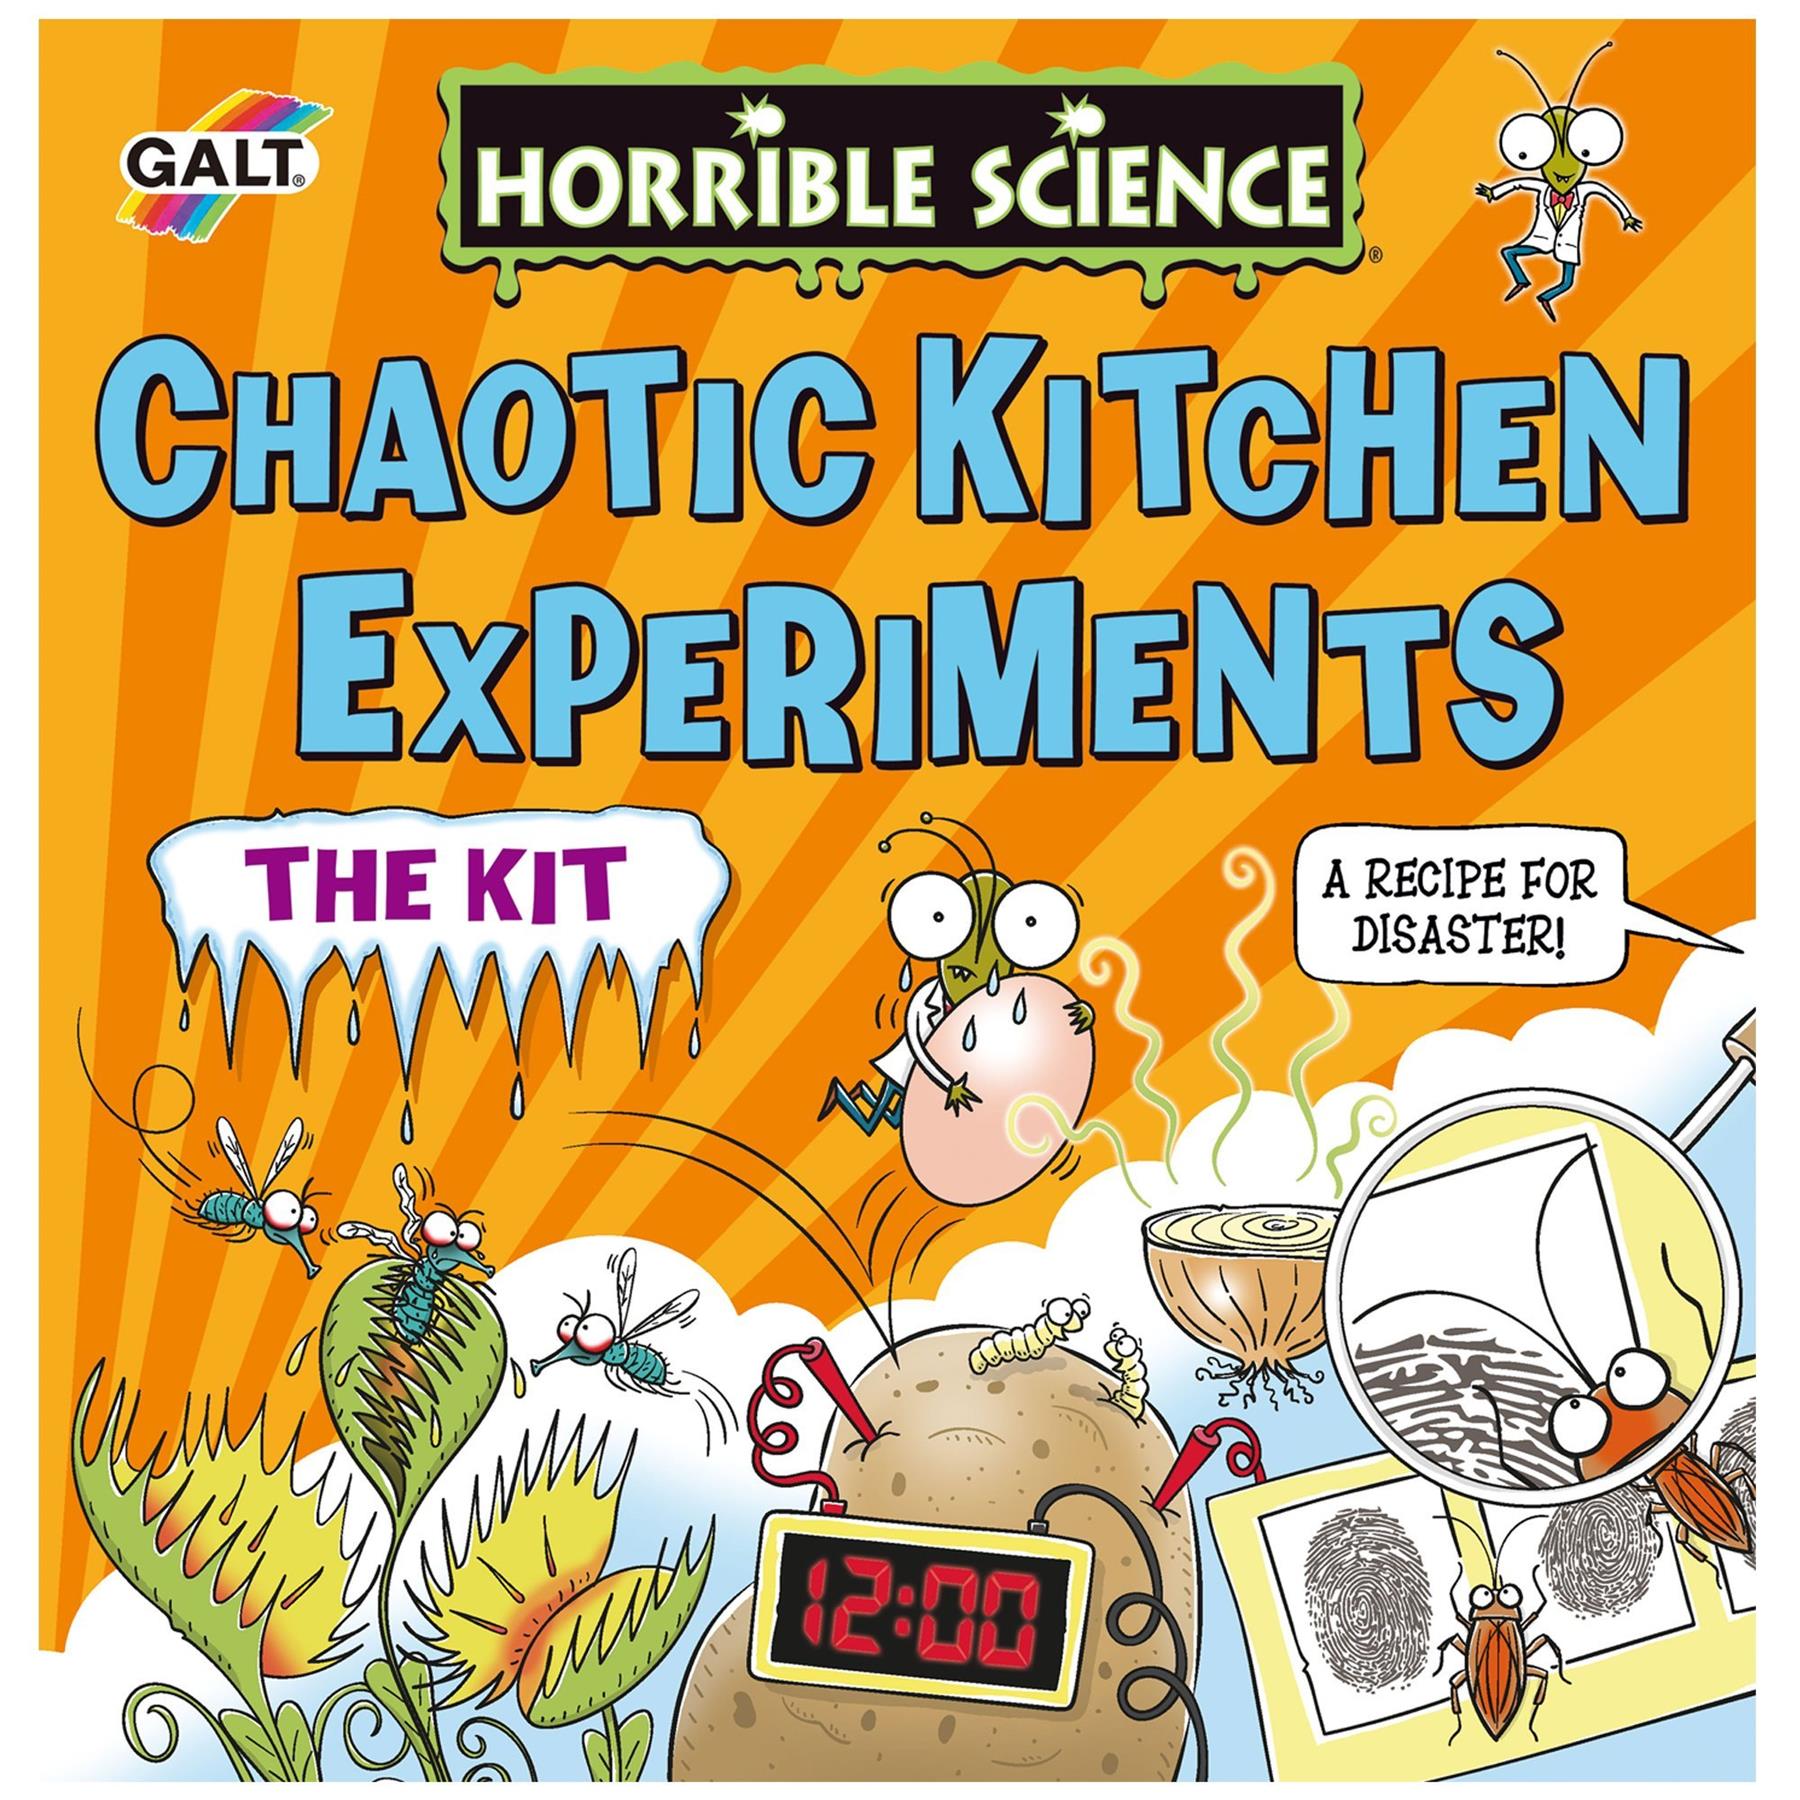 Galt Toys Horrible Science Chaotic Kitchen Experiments